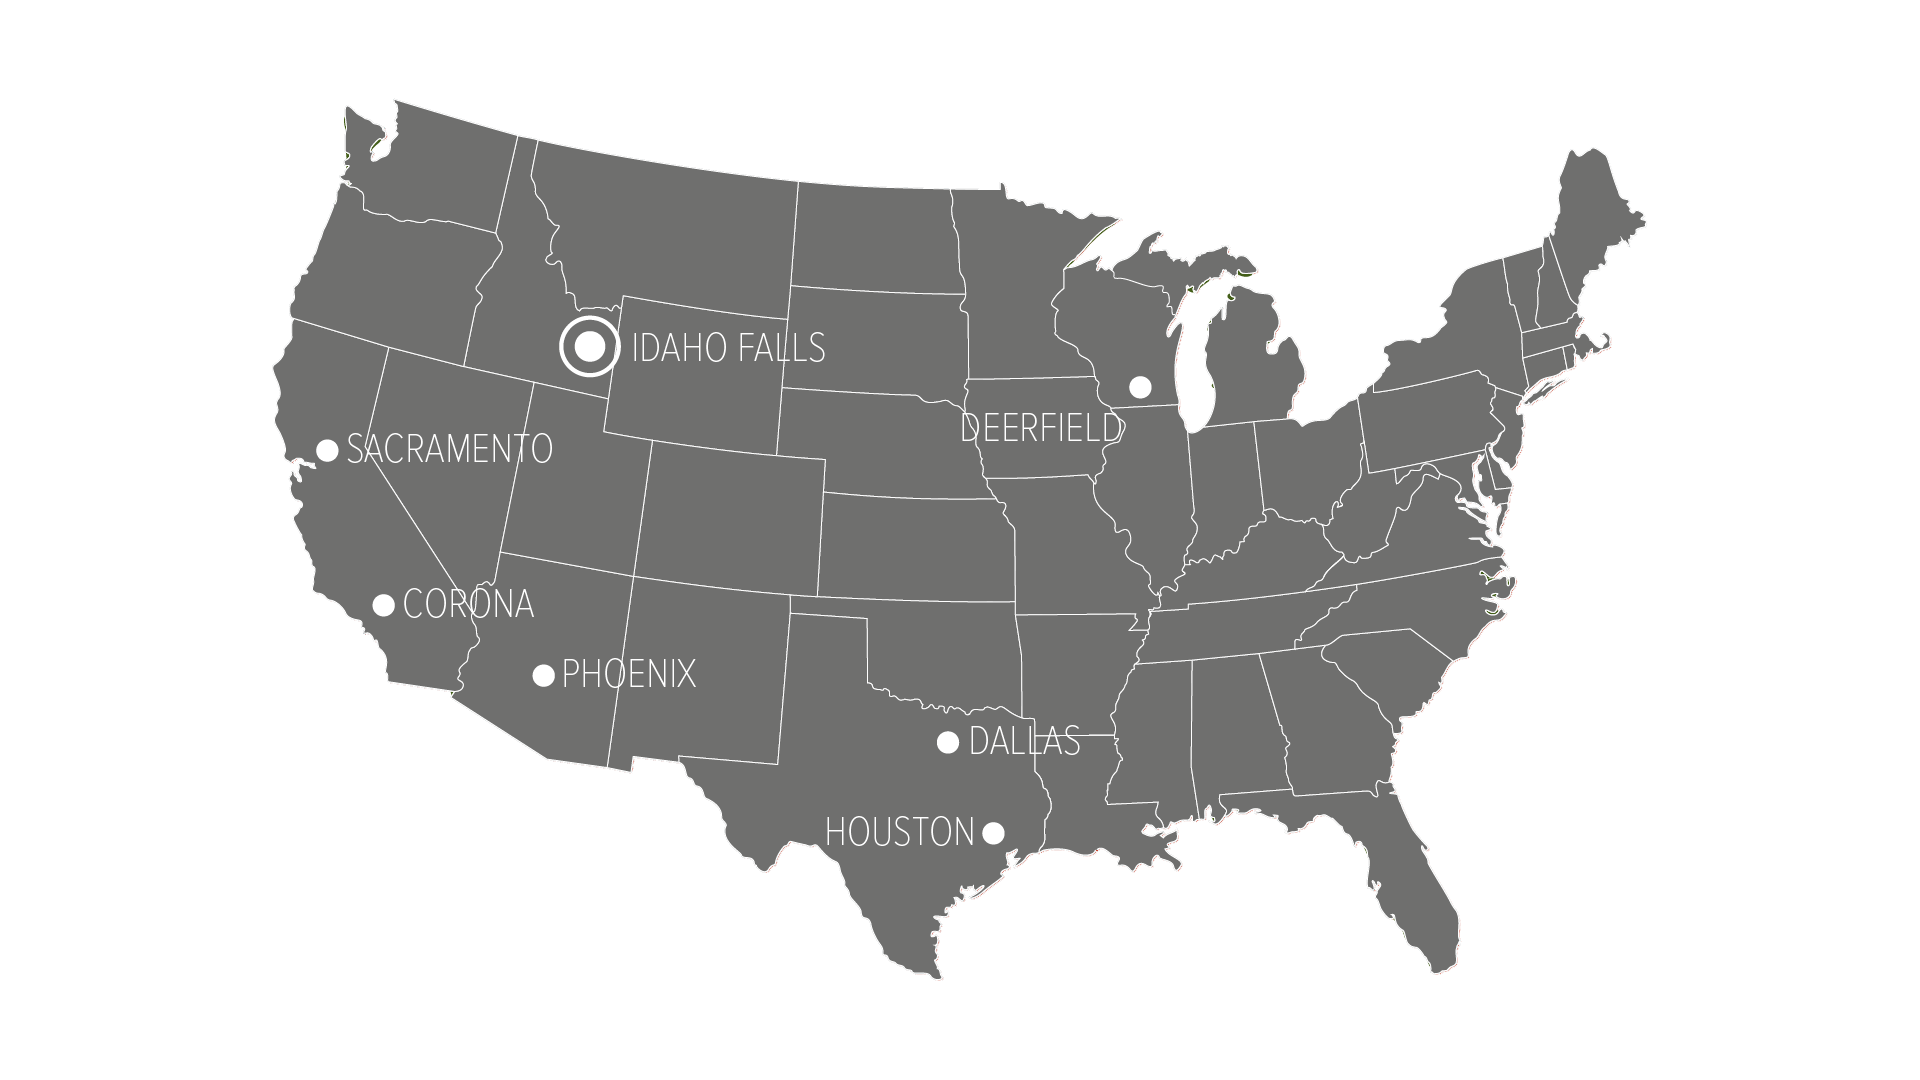 United States map showing Consumer Electronics coverage